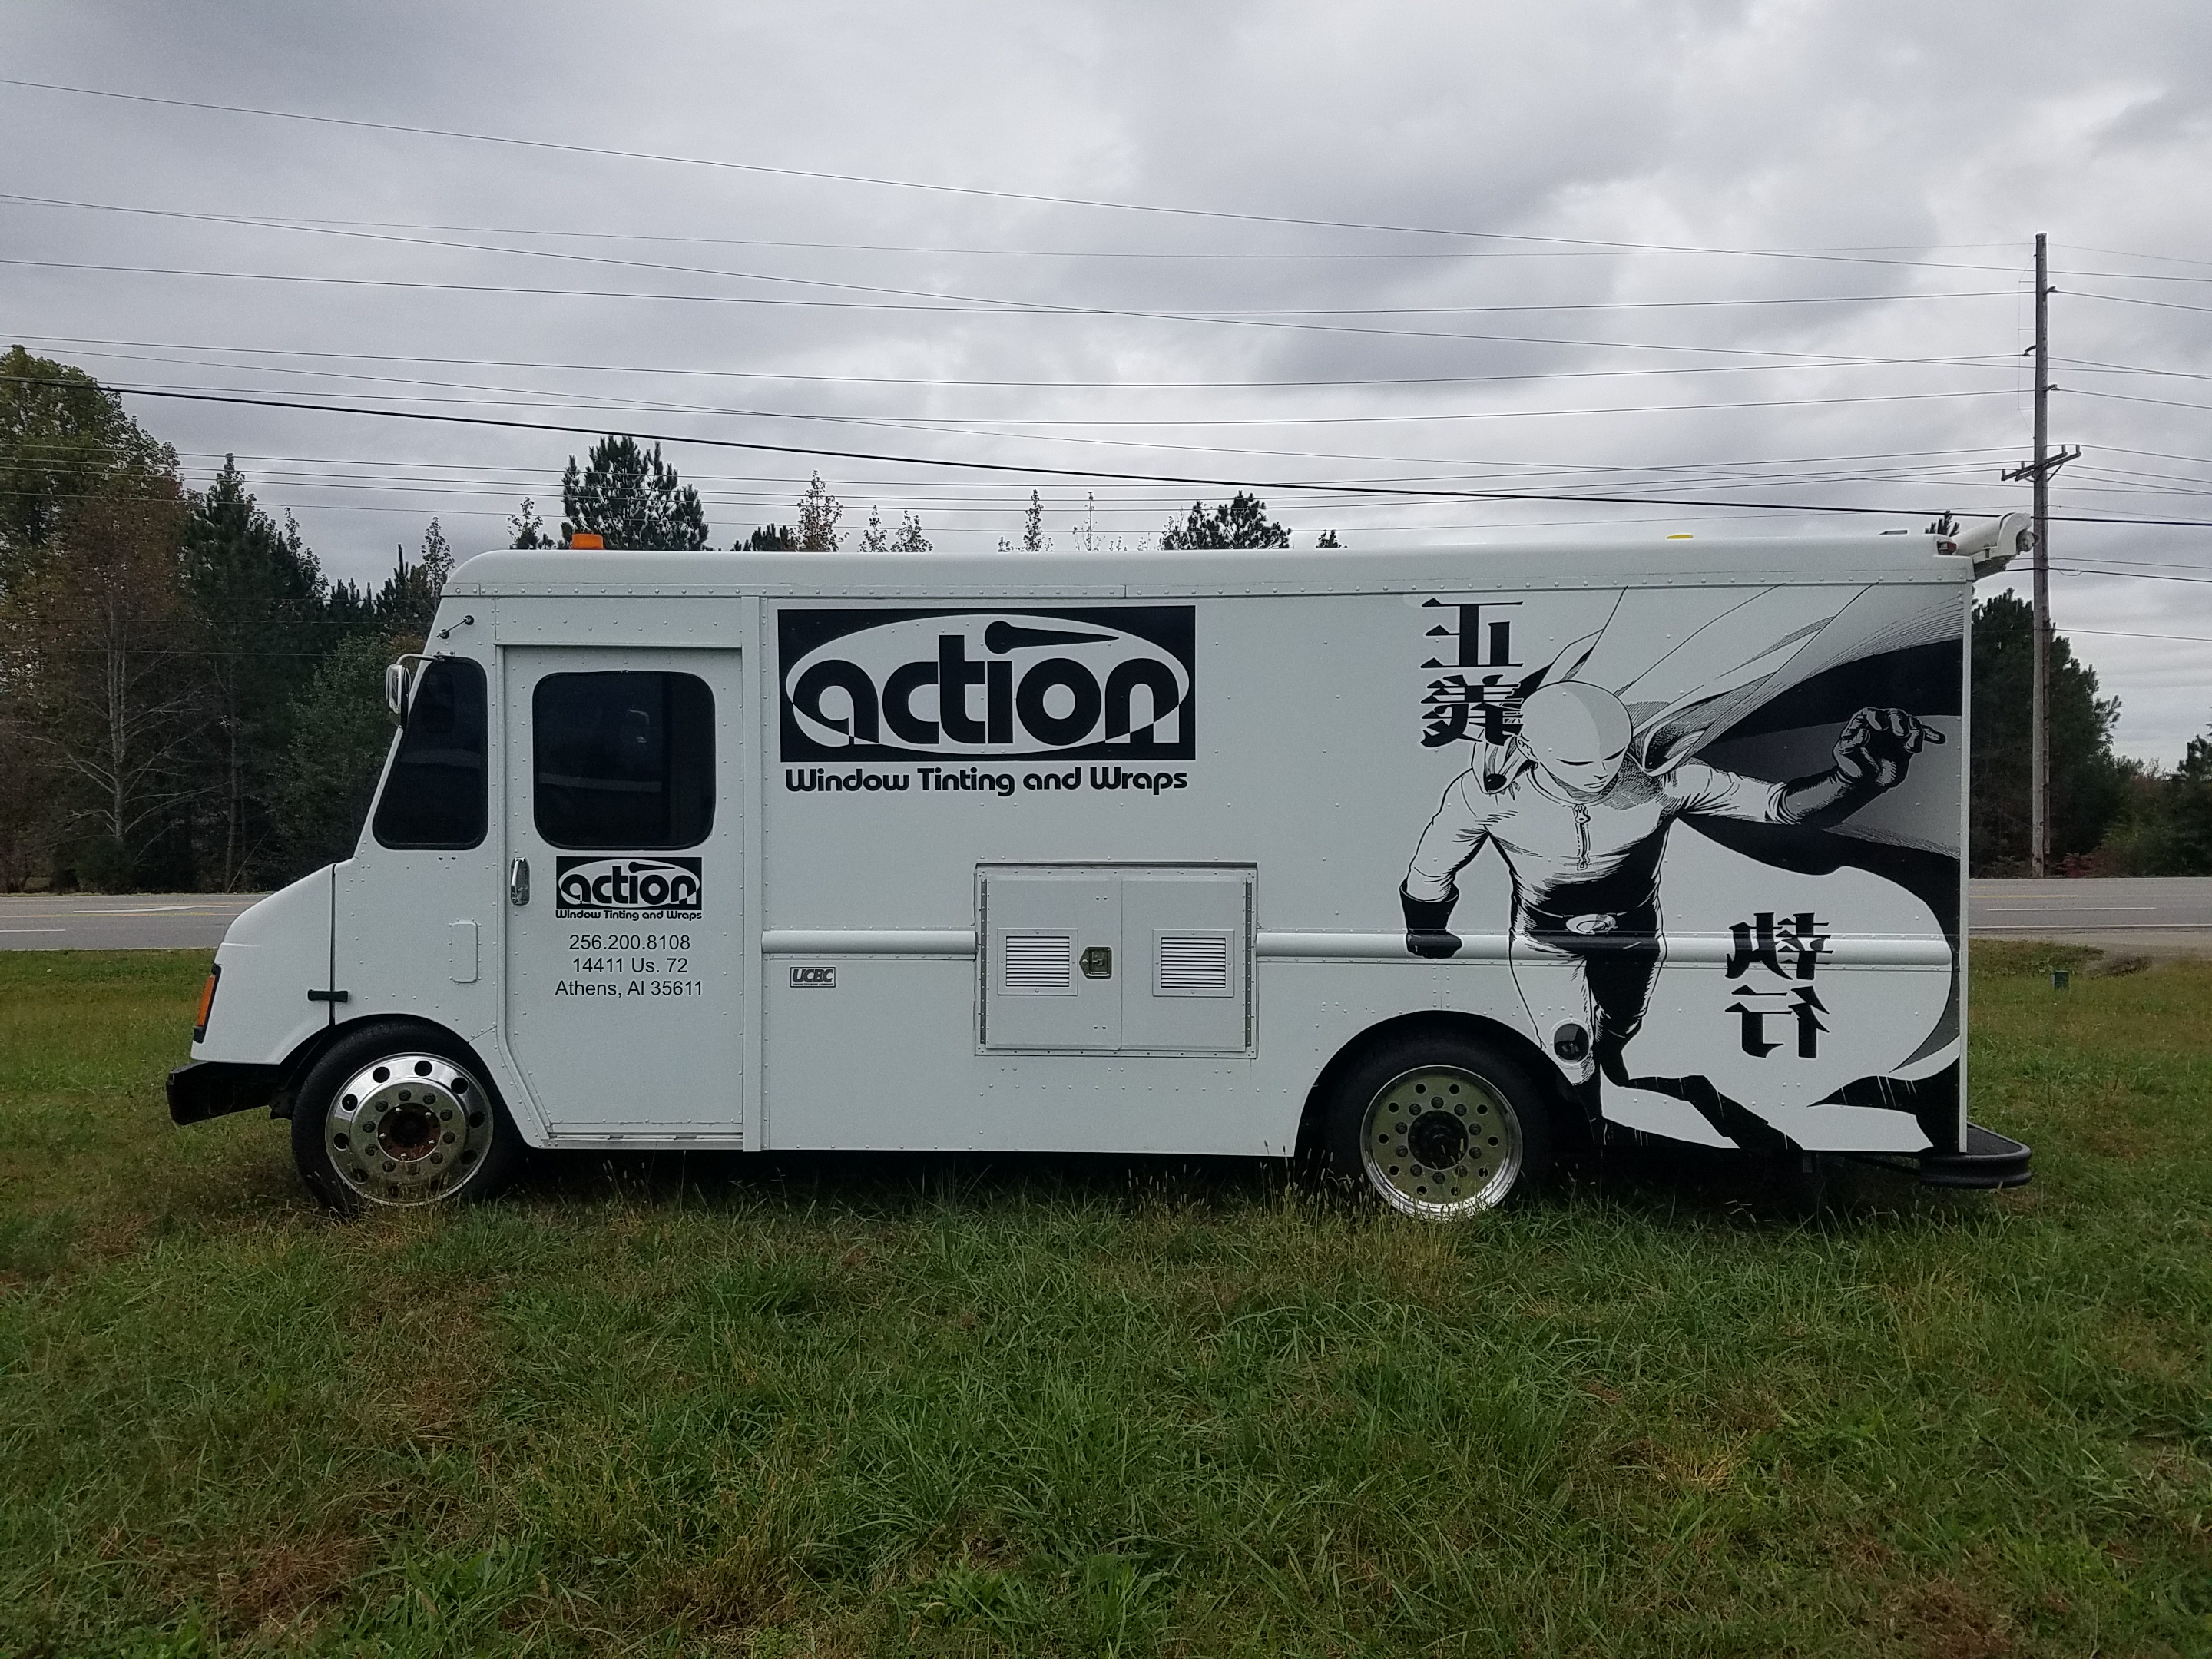 Action Window Tinting and Wraps Logo